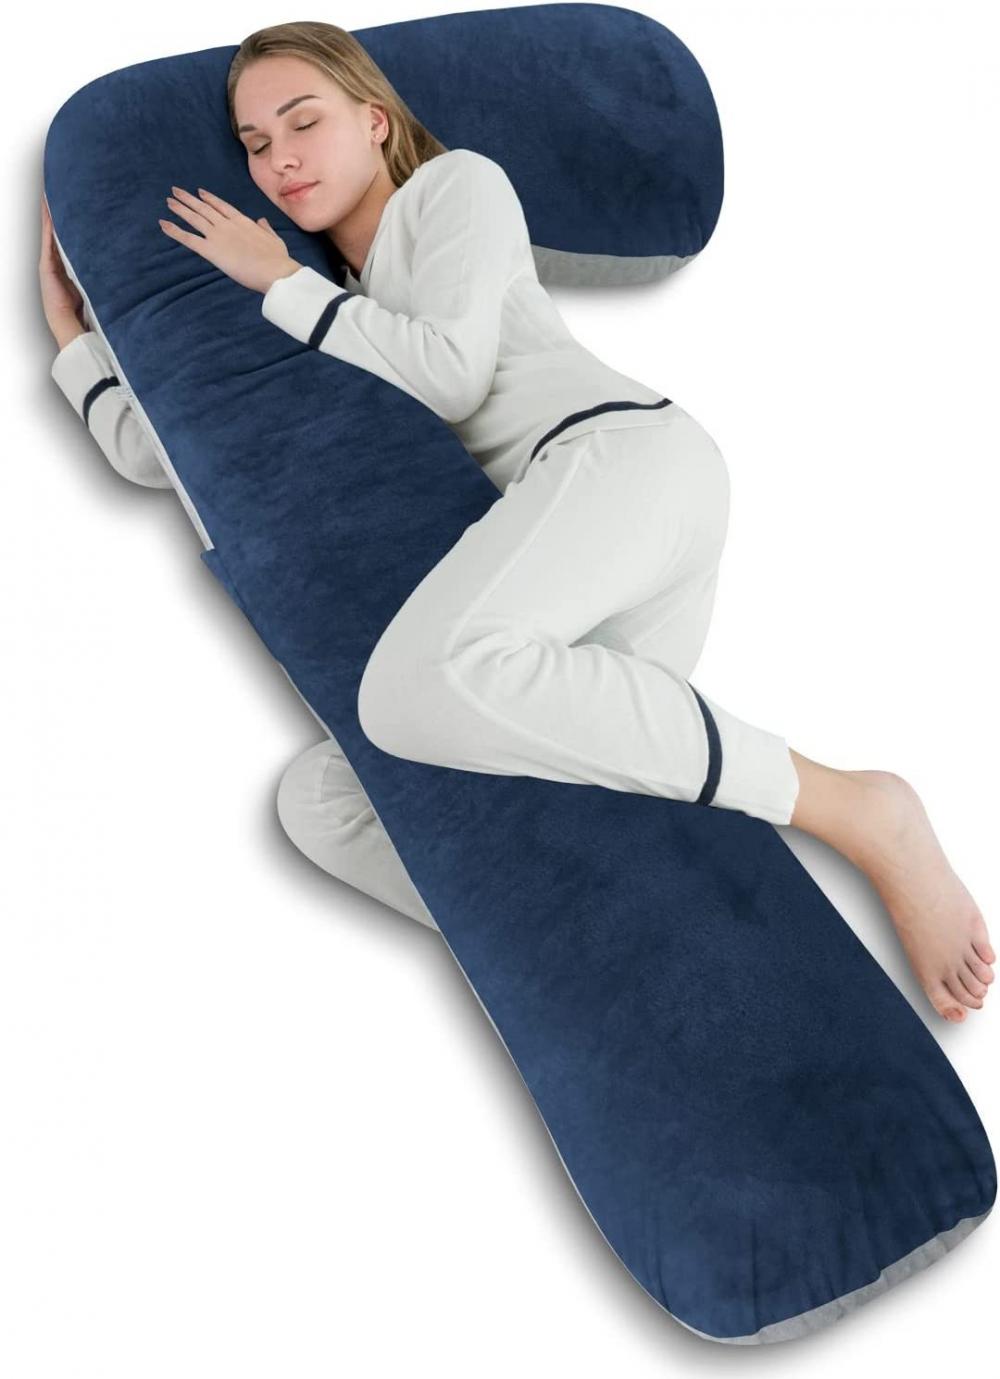 L-Shaped Pregnancy Pillow for Side Sleeping